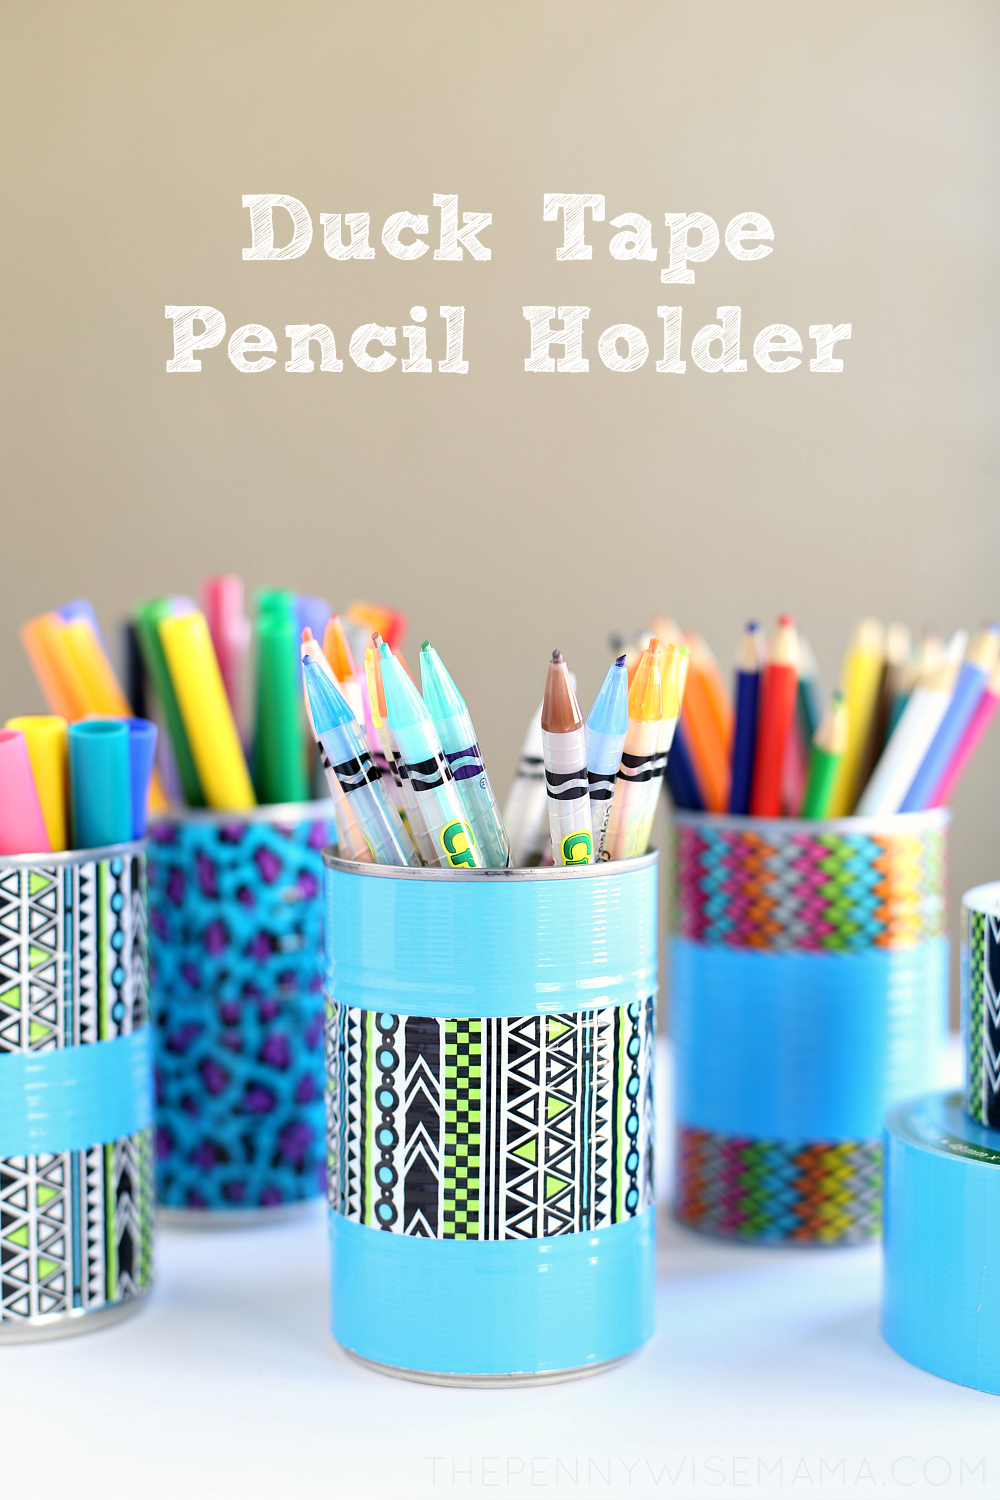 Easy DIY Duck Tape Pencil Holder - great for the classroom, art room, or home!